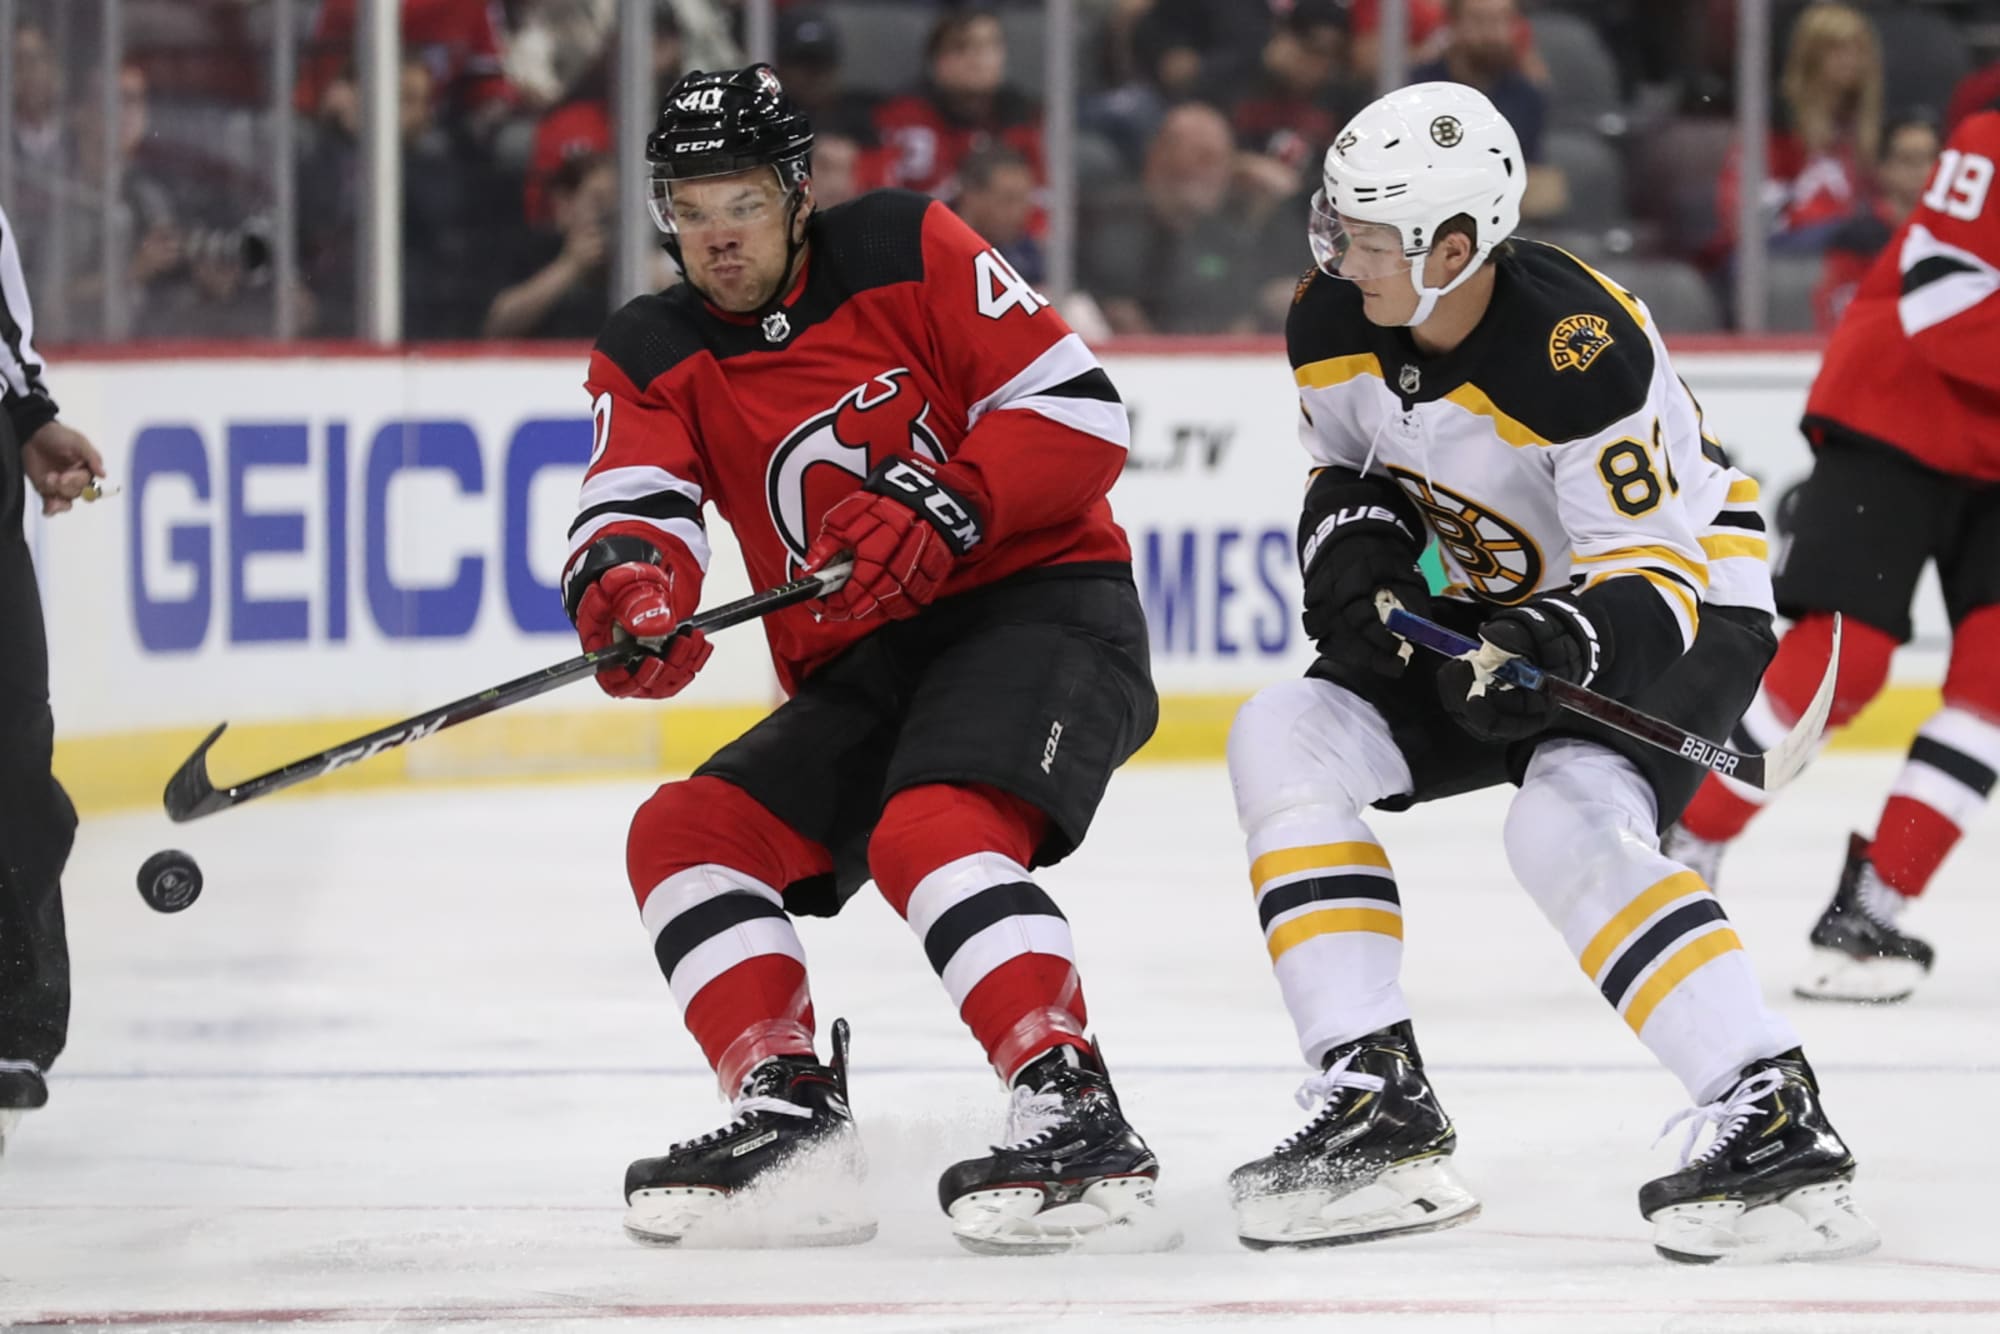 New Jersey Devils - #NJDevils NEWS: New Jersey has recalled D Josh Jacobs  from Binghamton (AHL). He has joined the team in San Jose and will be at  morning skate.